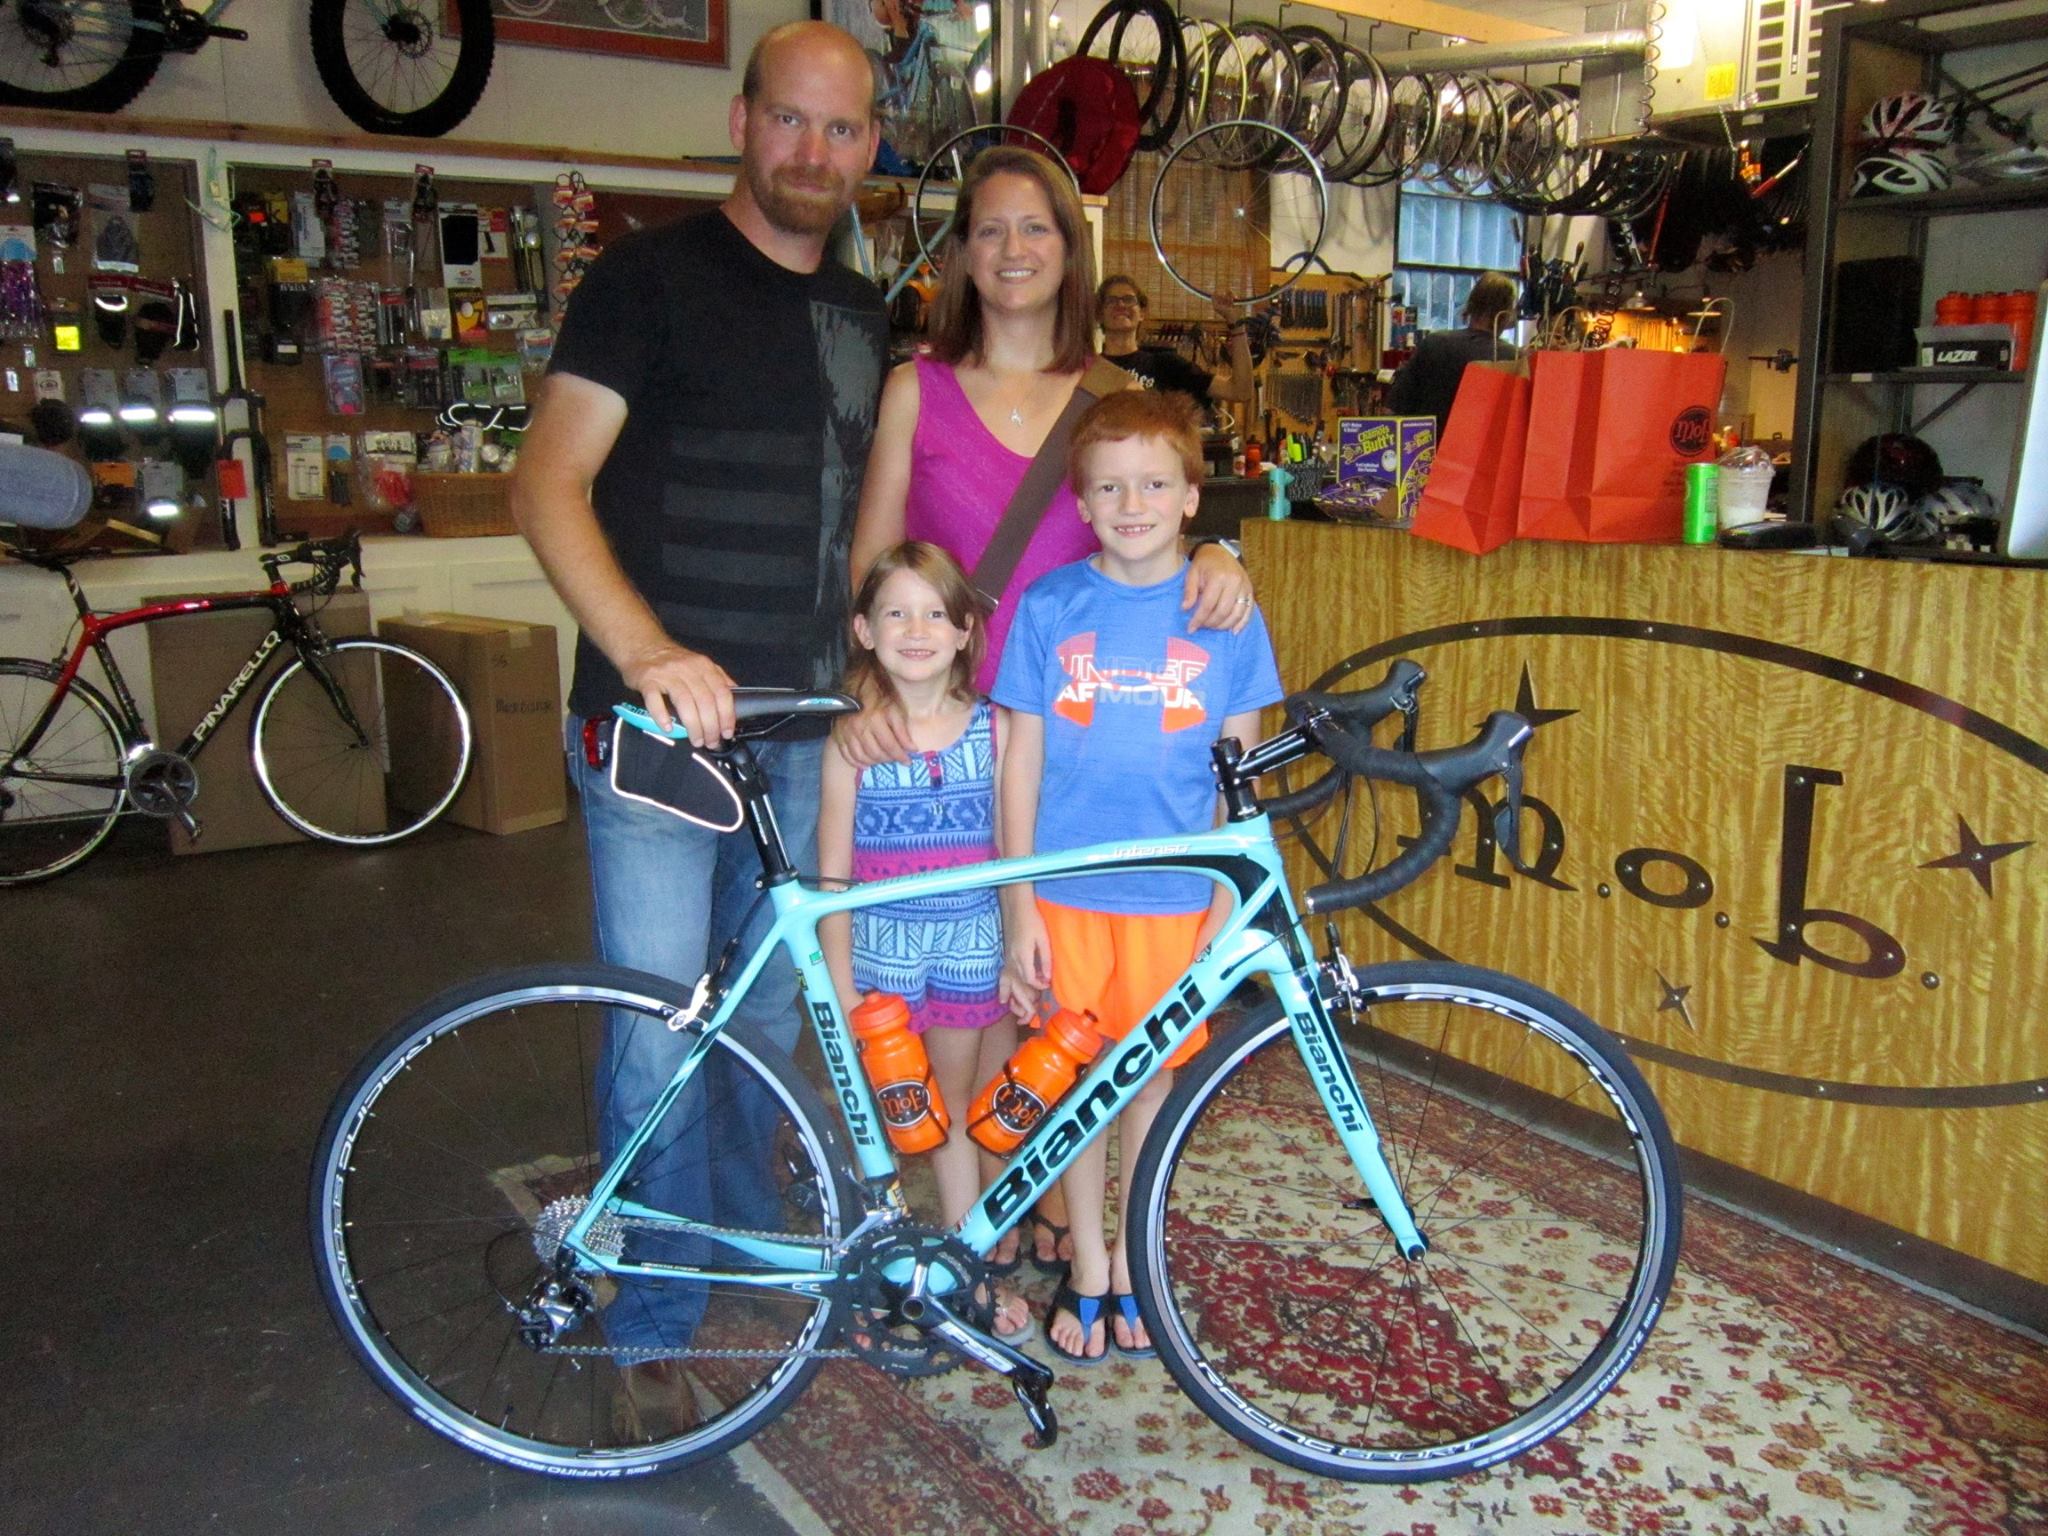 Michael, Lacie, Autumn, and Brice with Michael’s New Bianchi Intenso. Michael and Lacie have both had a great summer riding their Bianchi bicycles. Michael will enjoy the smooth efficiency of his new Bianchi Intenso Bicycle. Keep on riding Michael and Lacie. Looking Good!